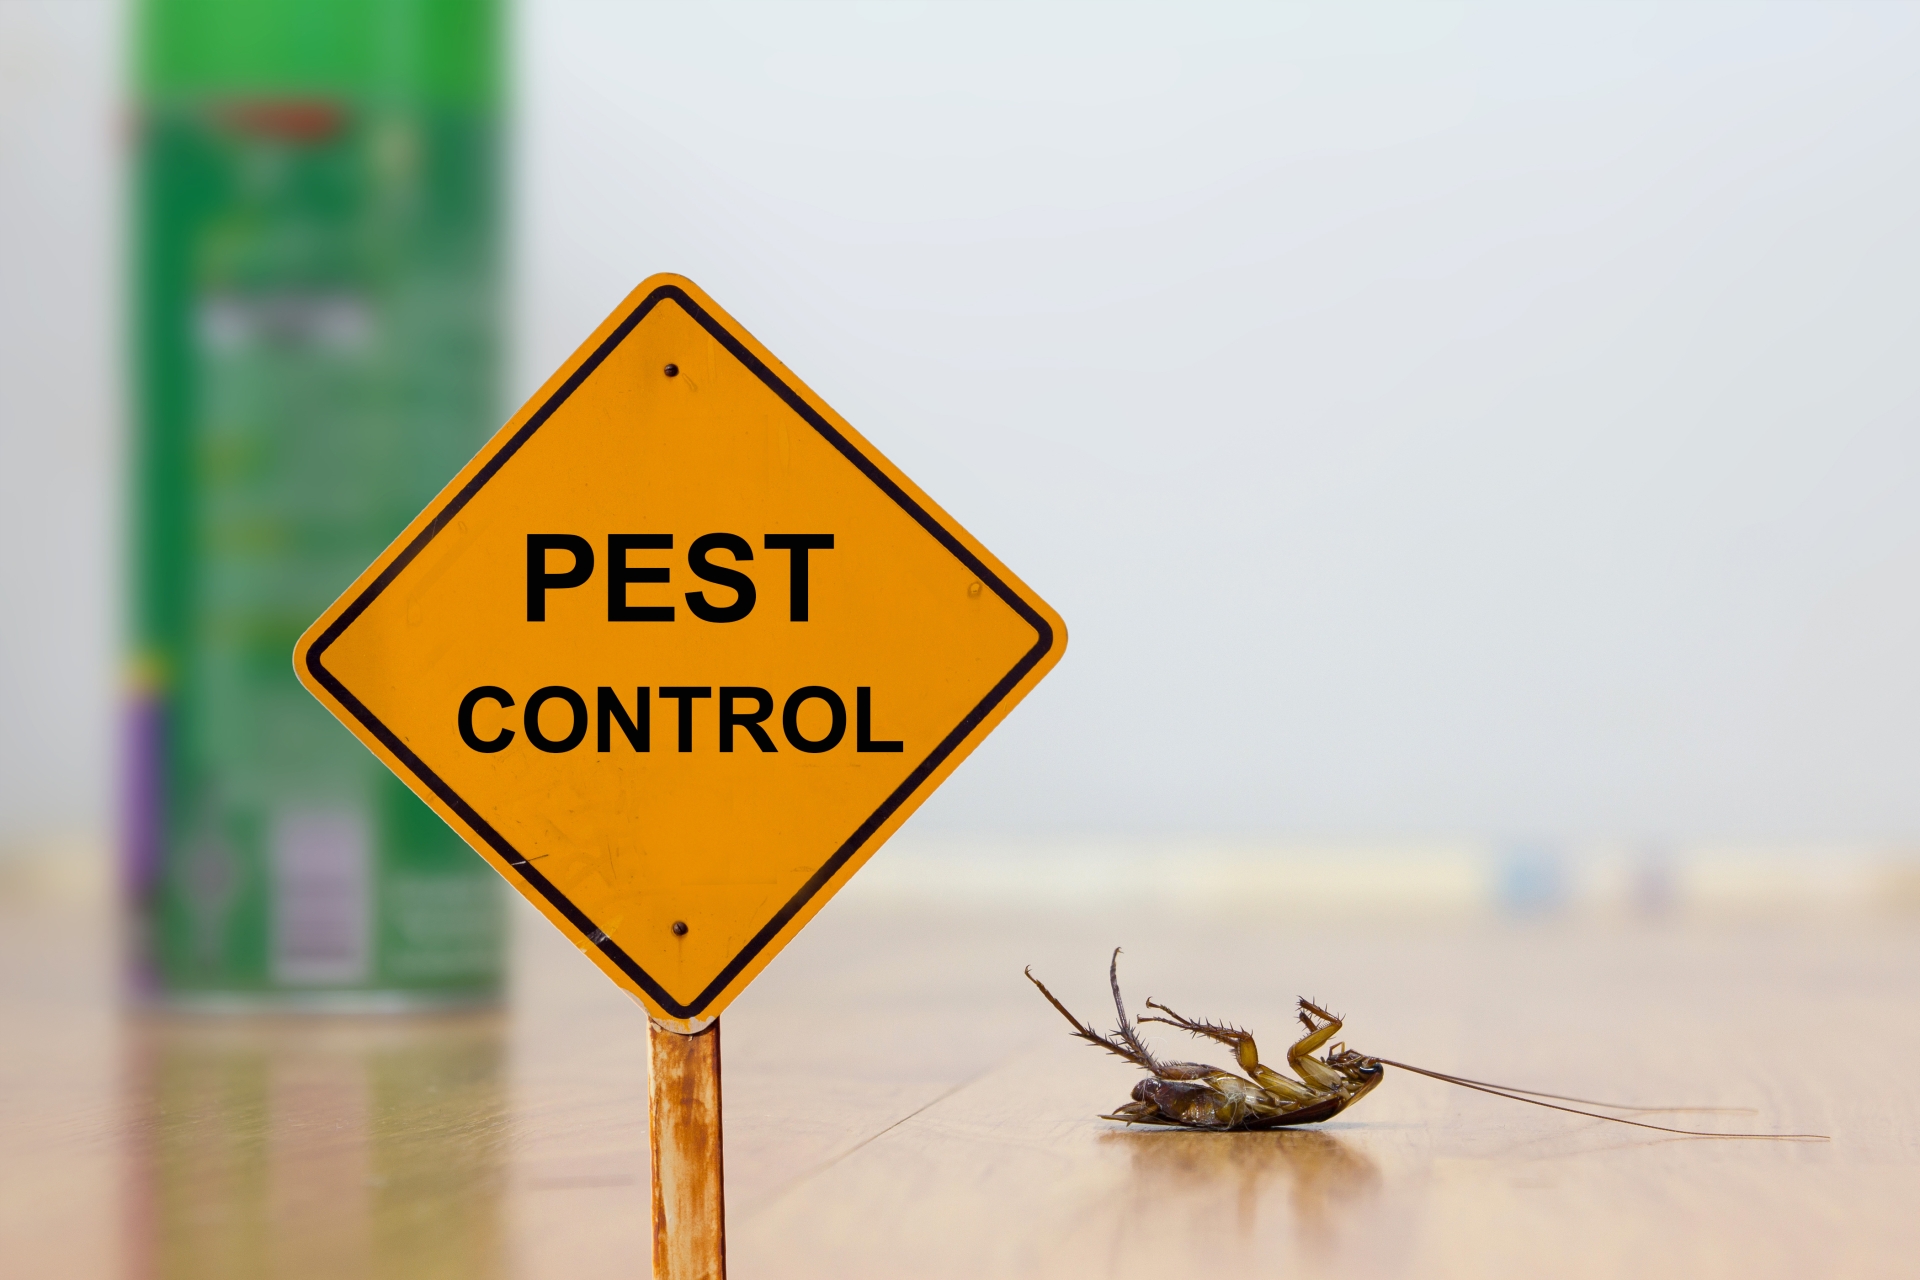 24 Hour Pest Control, Pest Control in Tufnell Park, N19. Call Now 020 8166 9746